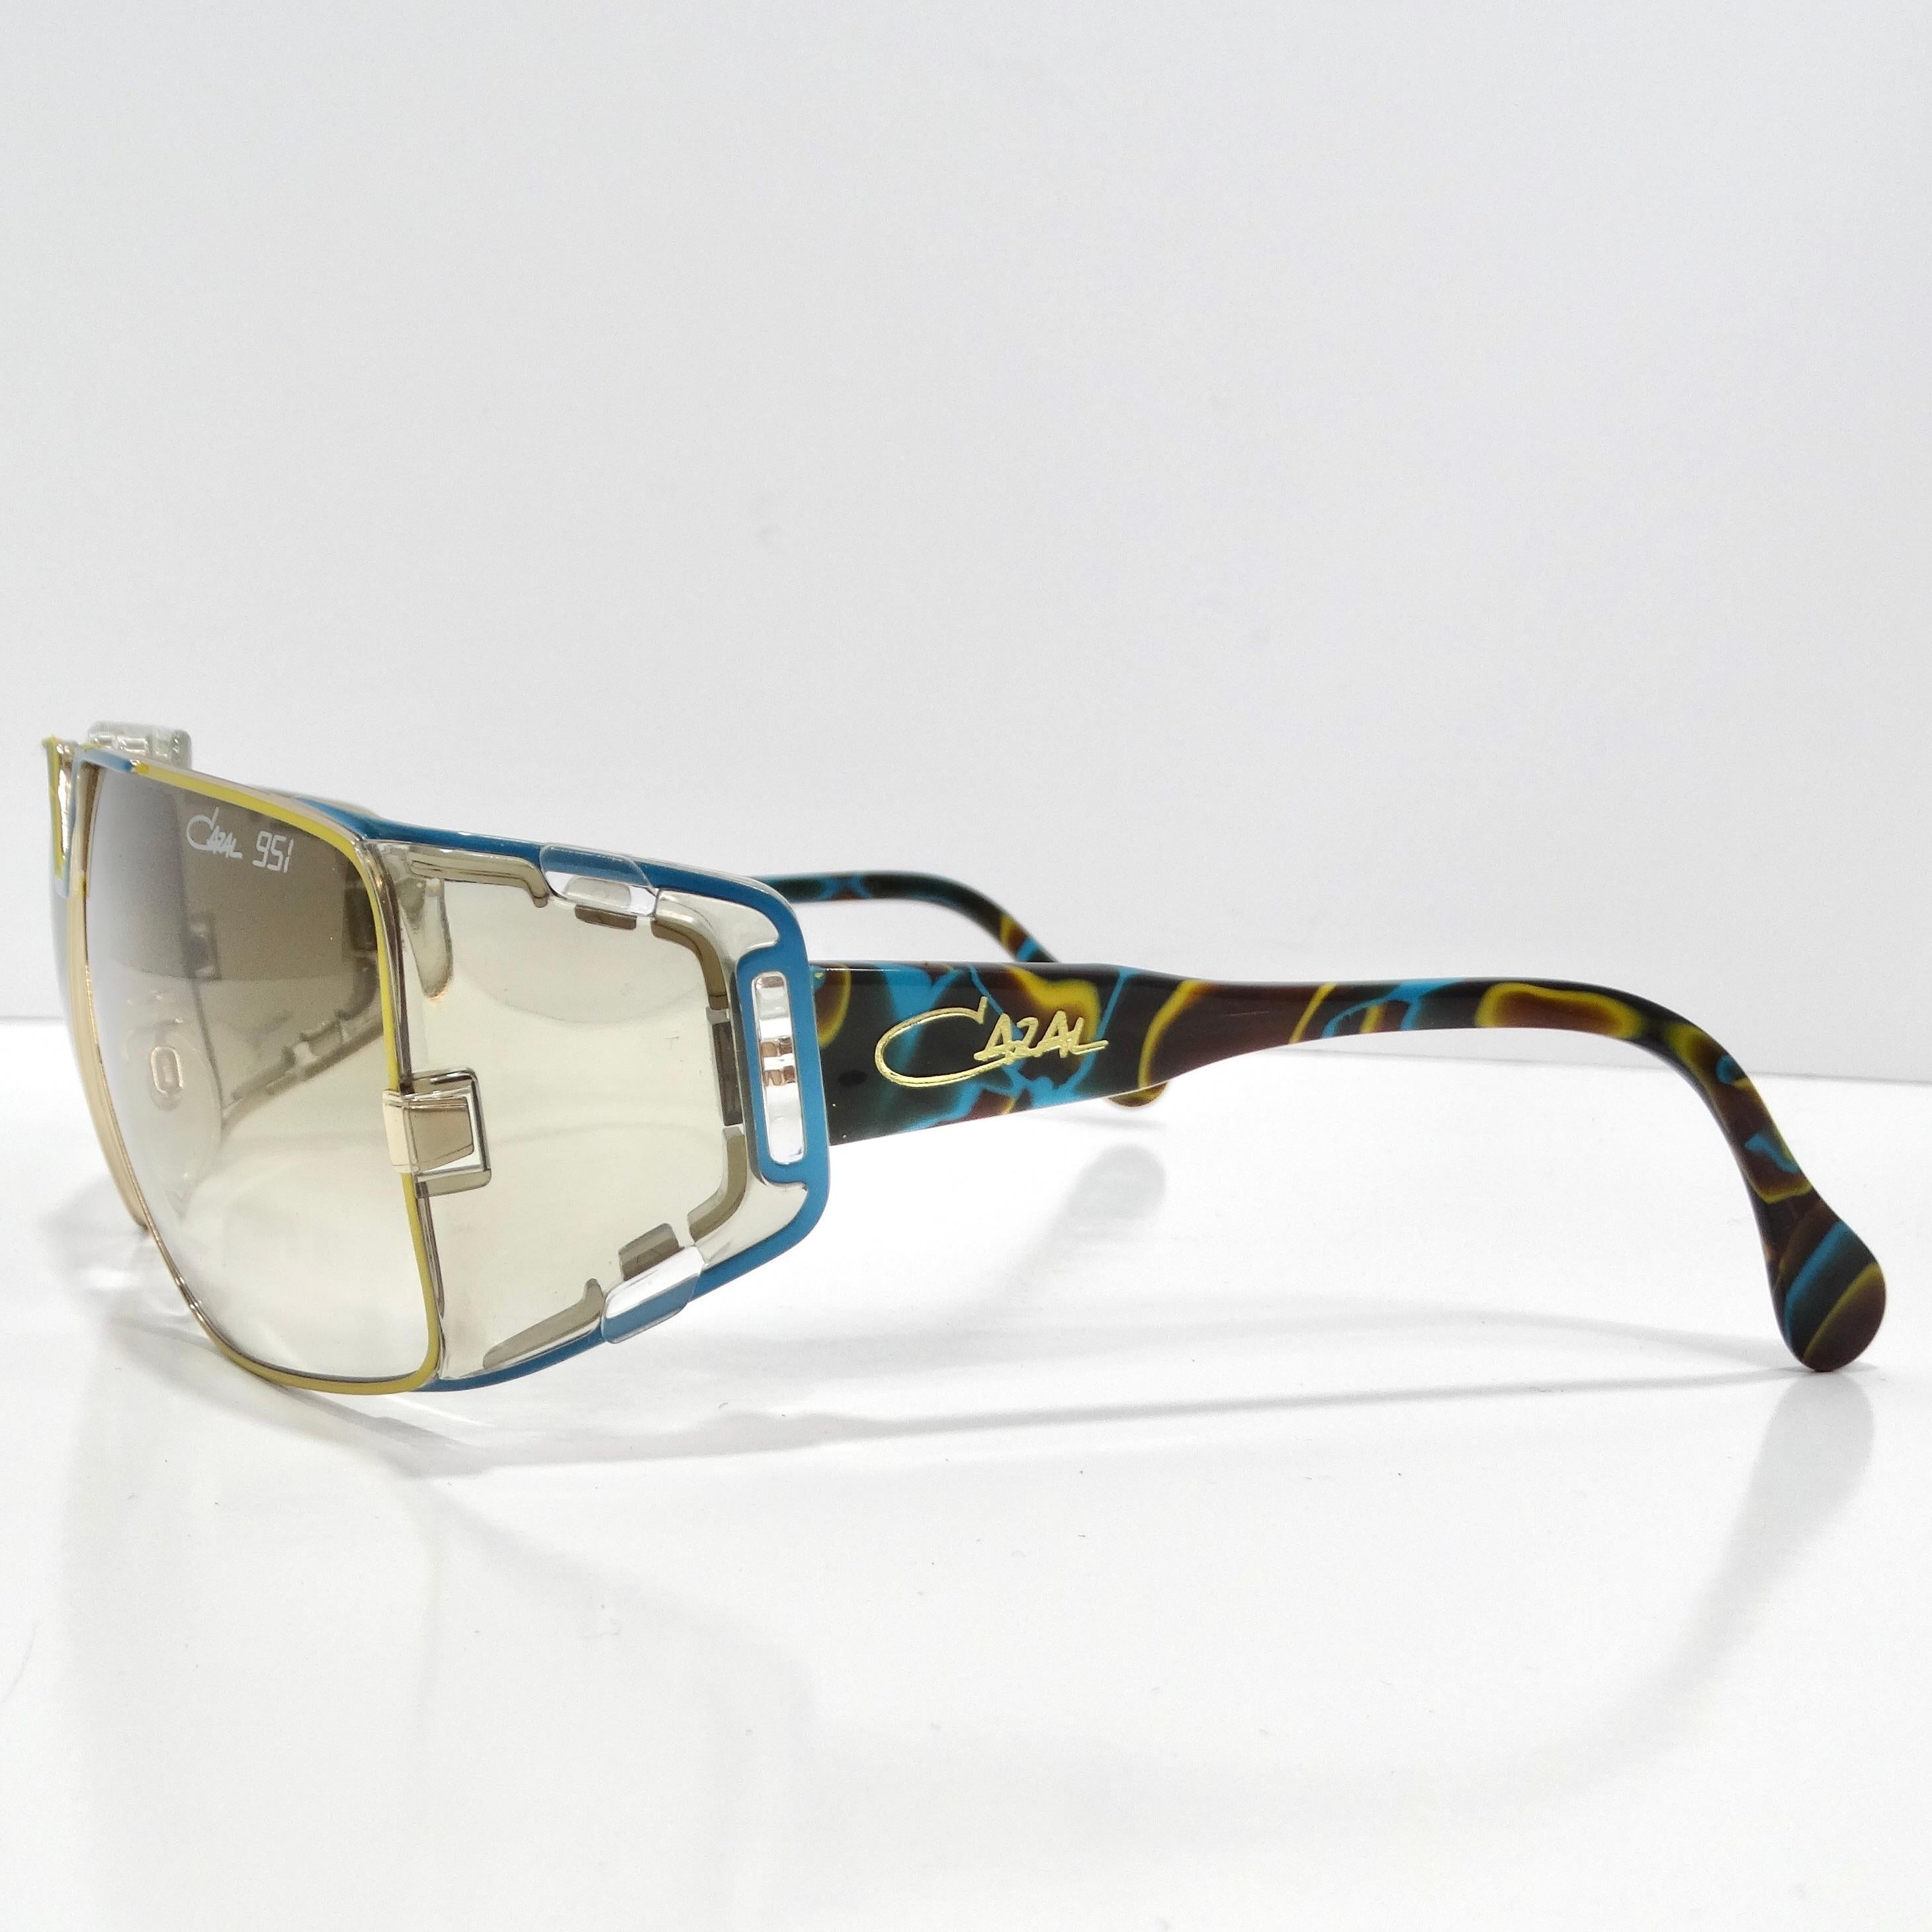 Cazal 951 Limited Edition Sunglasses For Sale 3